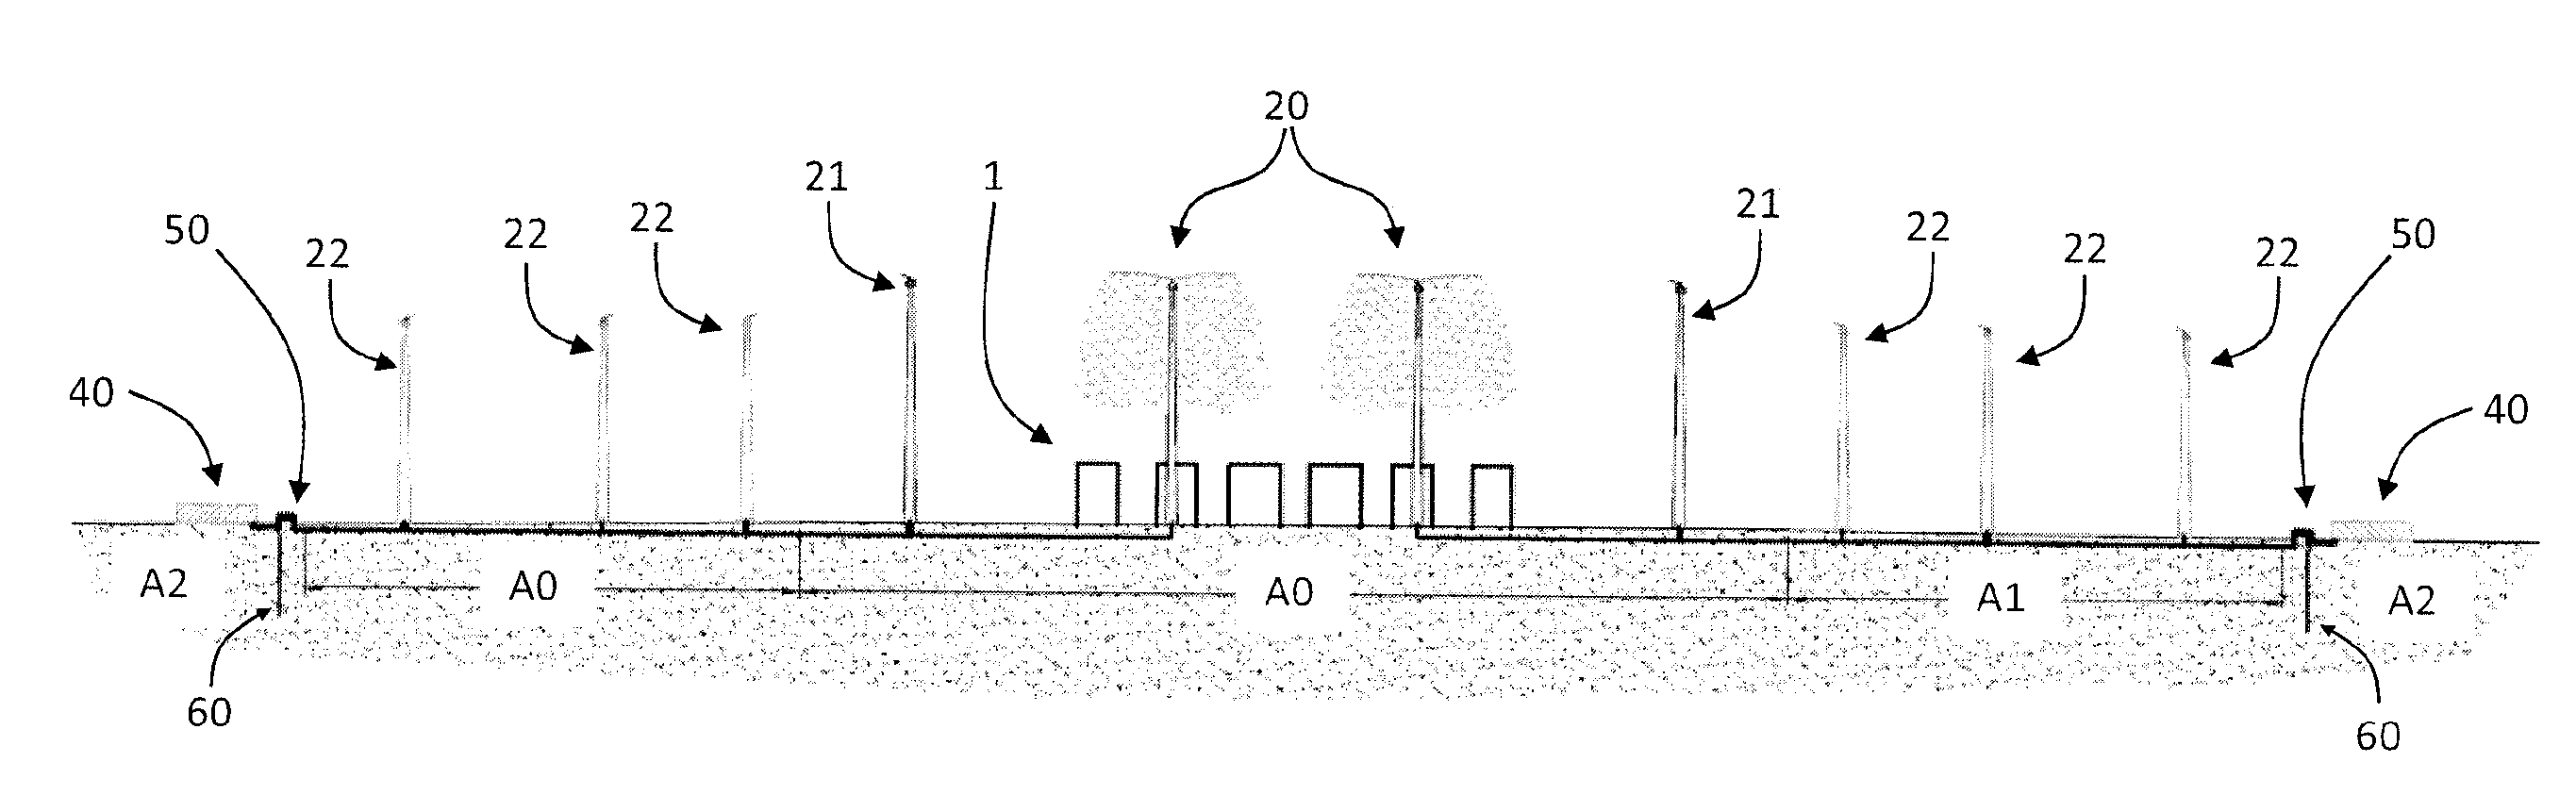 System for abatement of noxious emissions in the atmosphere from an industrial or nuclear power plant